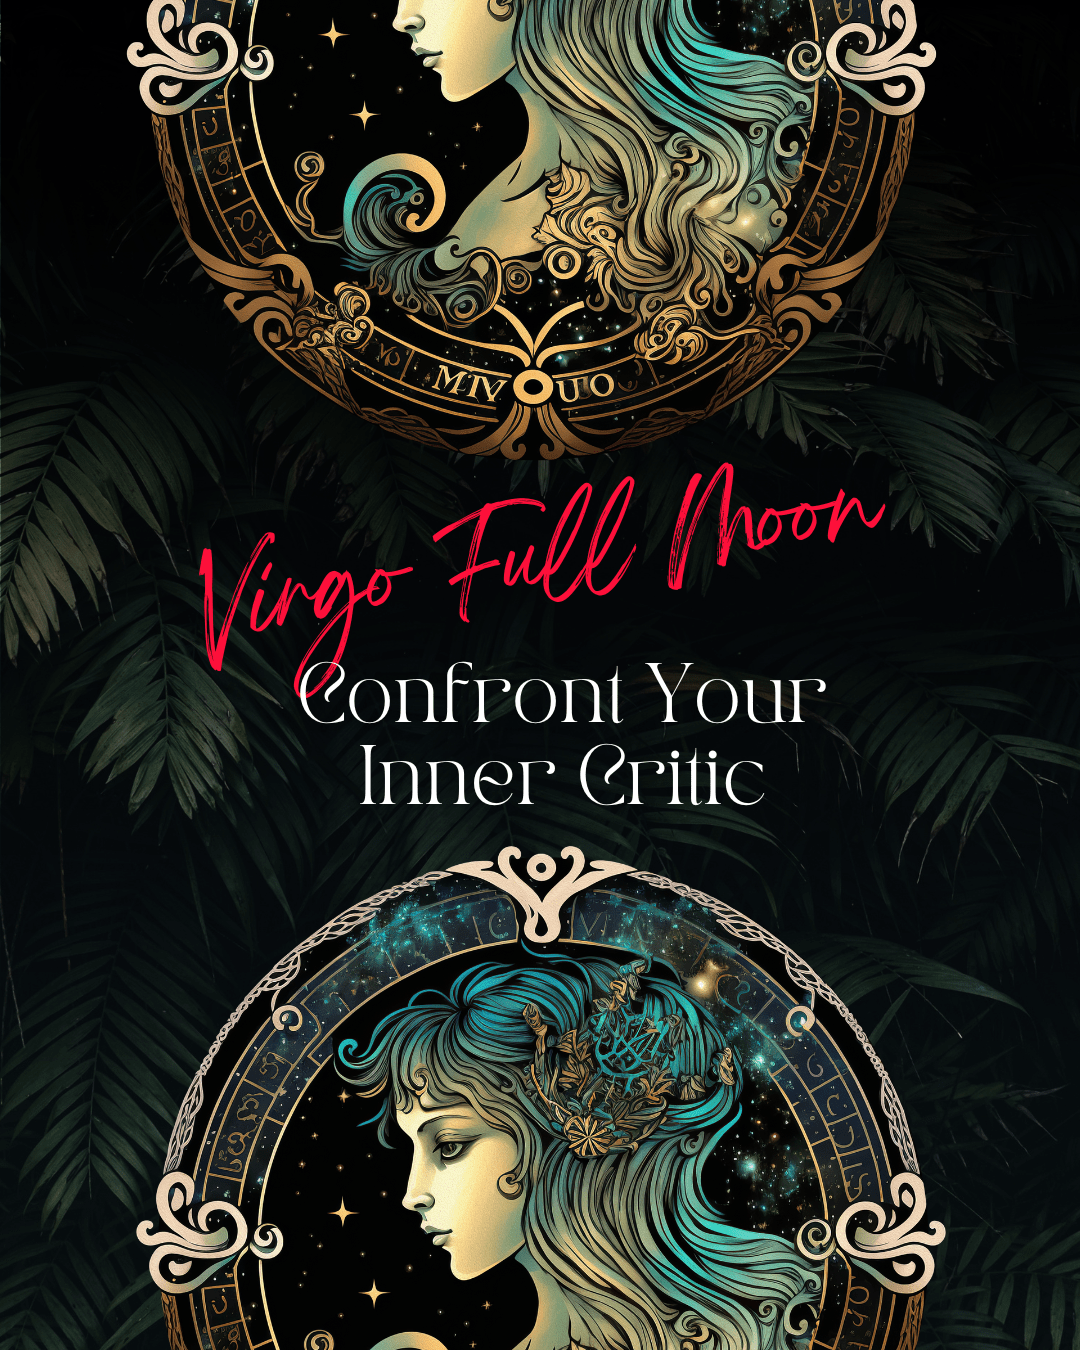 Full Moon in Virgo - March - Confront Your Inner Critic